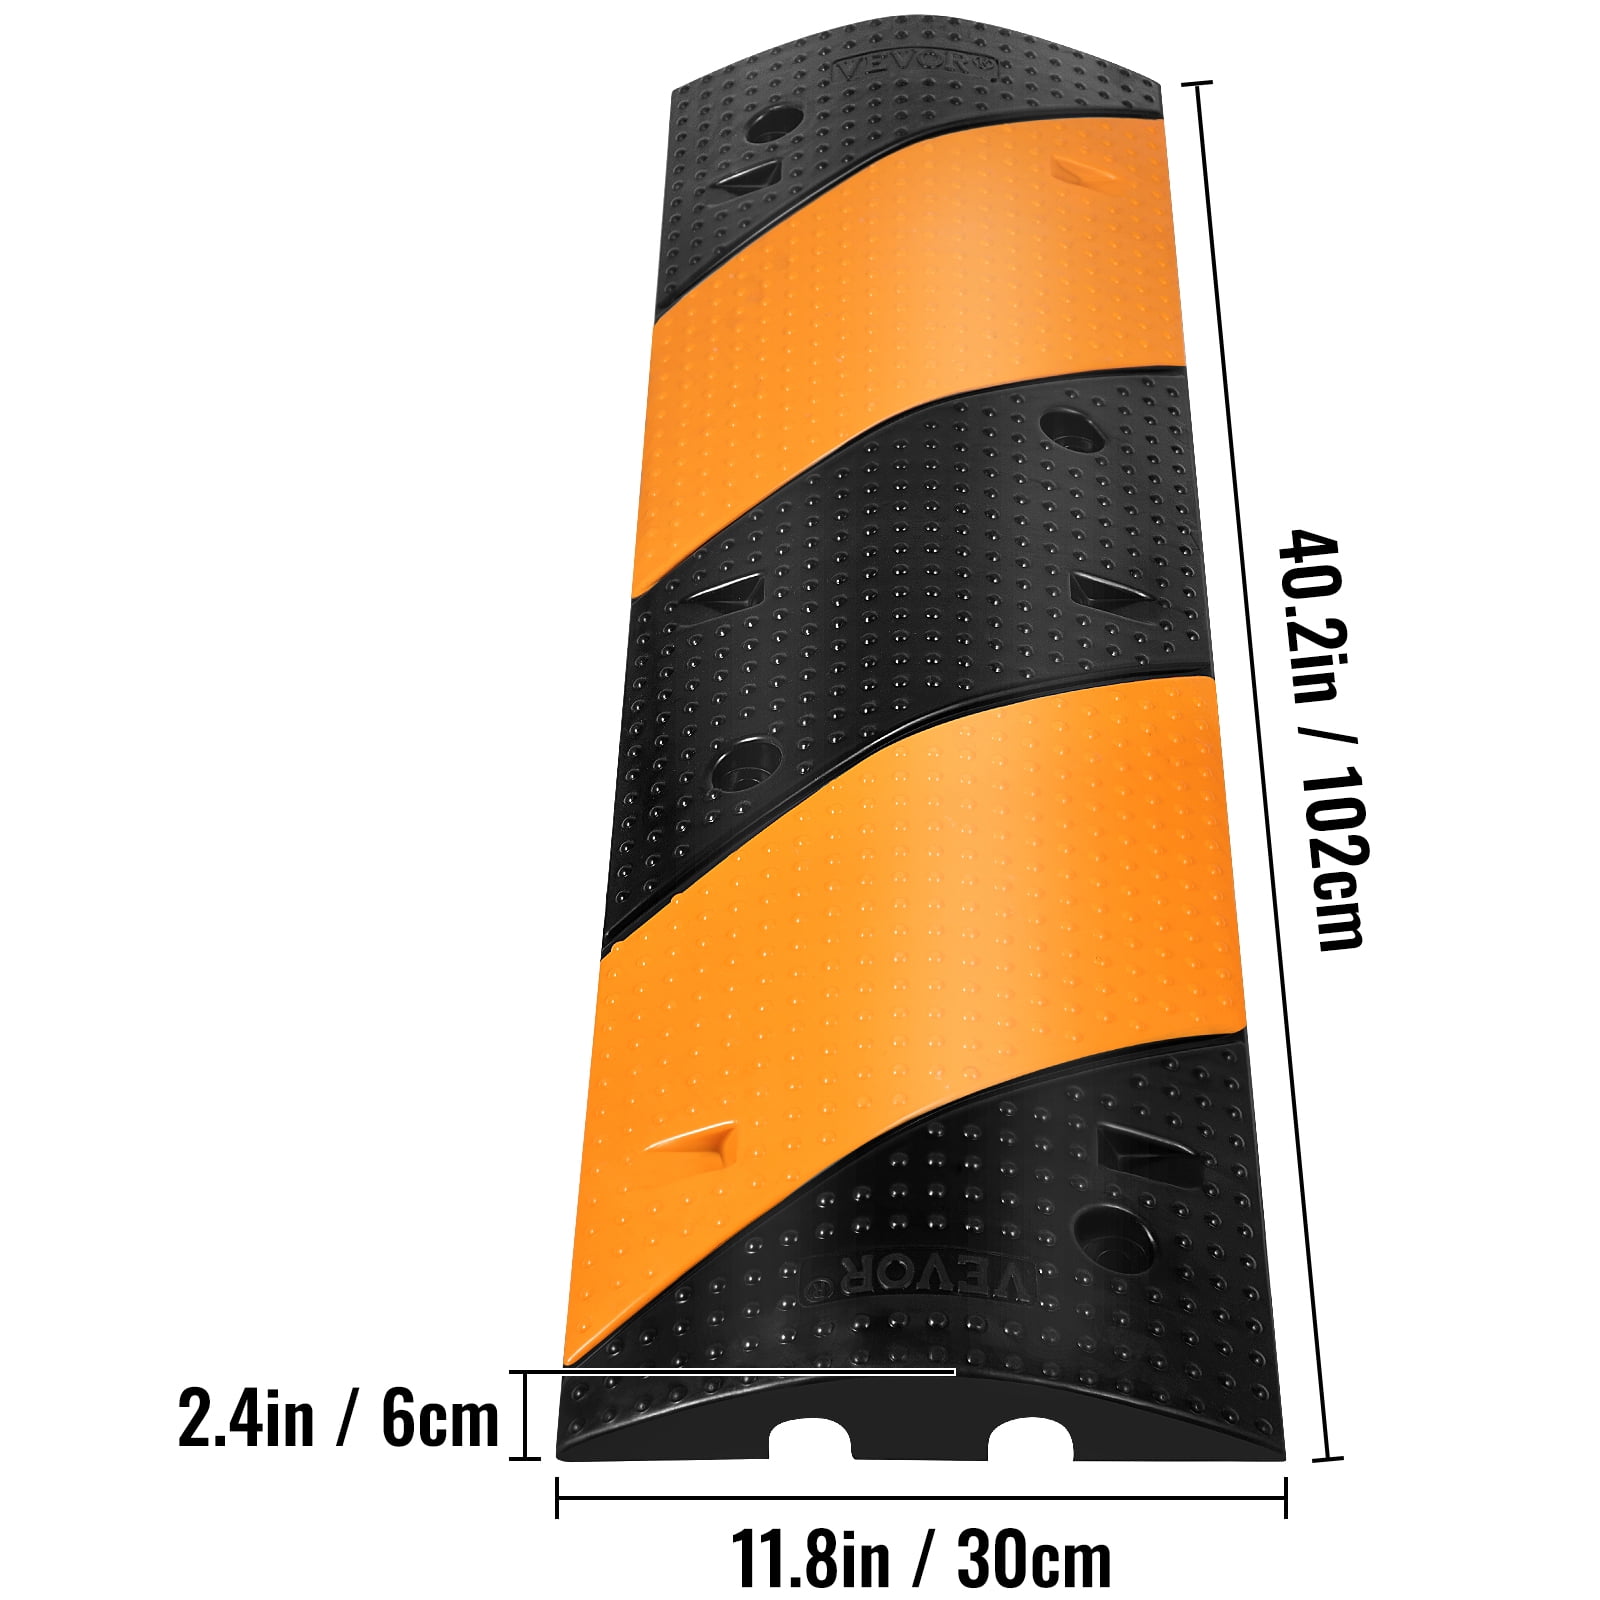 VEVORbrand Rubber Speed Bump, 1 Pack 2 Channel Speed Bump Hump, 40 Long  Modular Speed Bump Rated 22000 lbs Load Capacity, 40.2 x 11.8 x 2.4 inch  Garage Speed Bump for Asphalt Concrete Gravel Driveway 